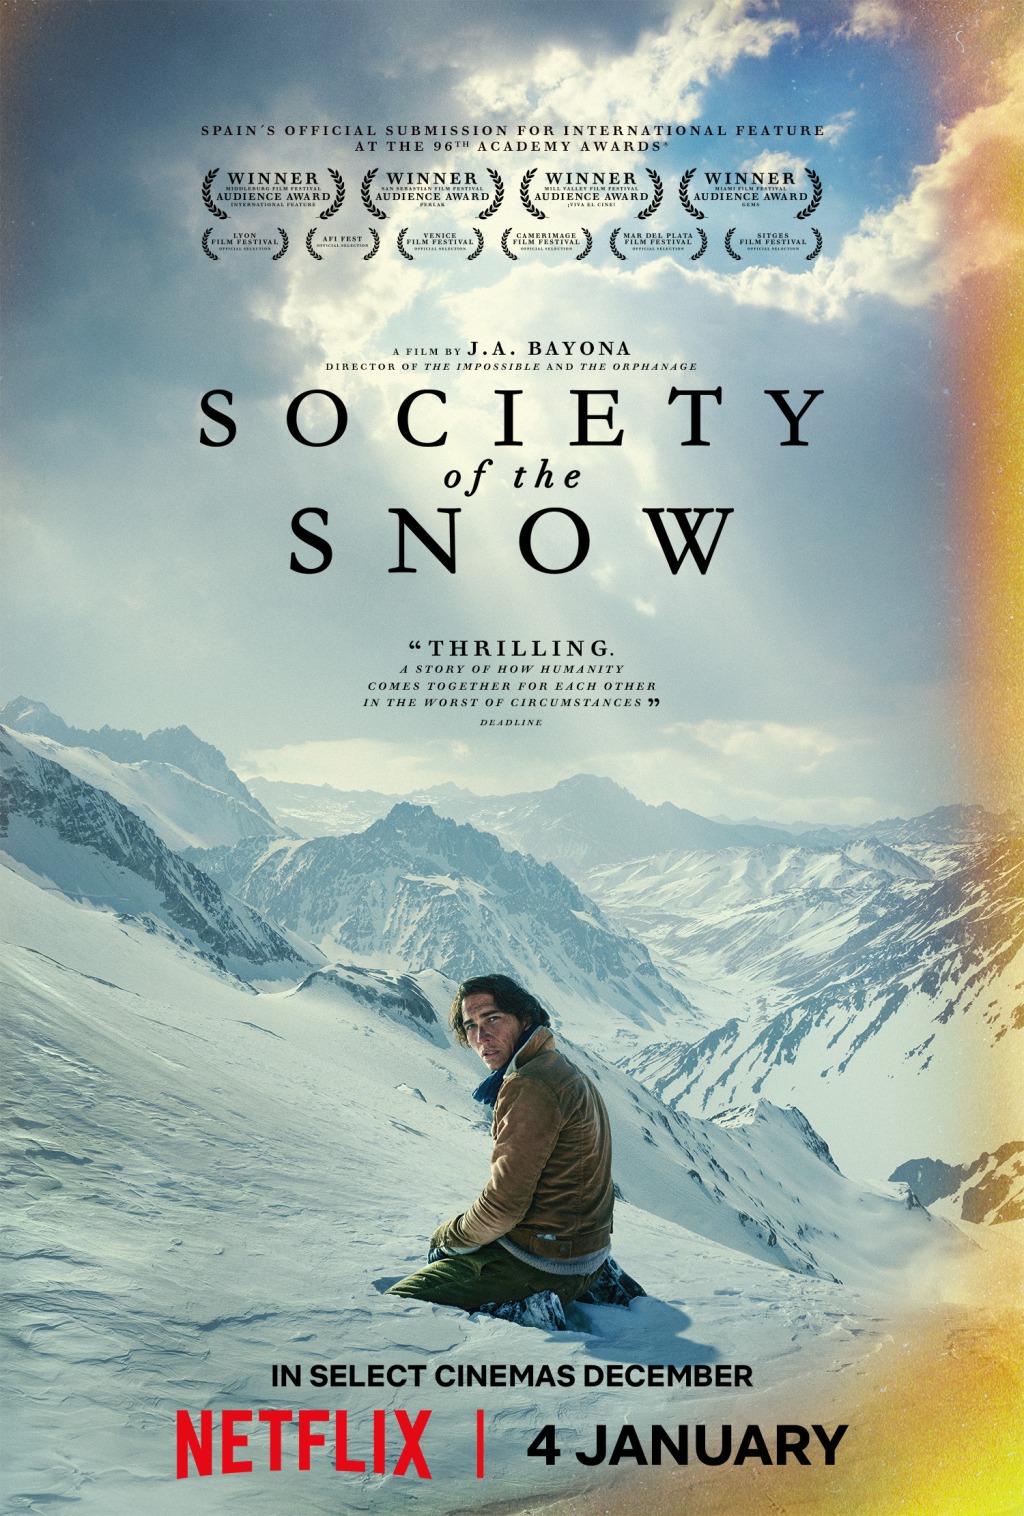 Society of the Snow Review — A gripping story of survival